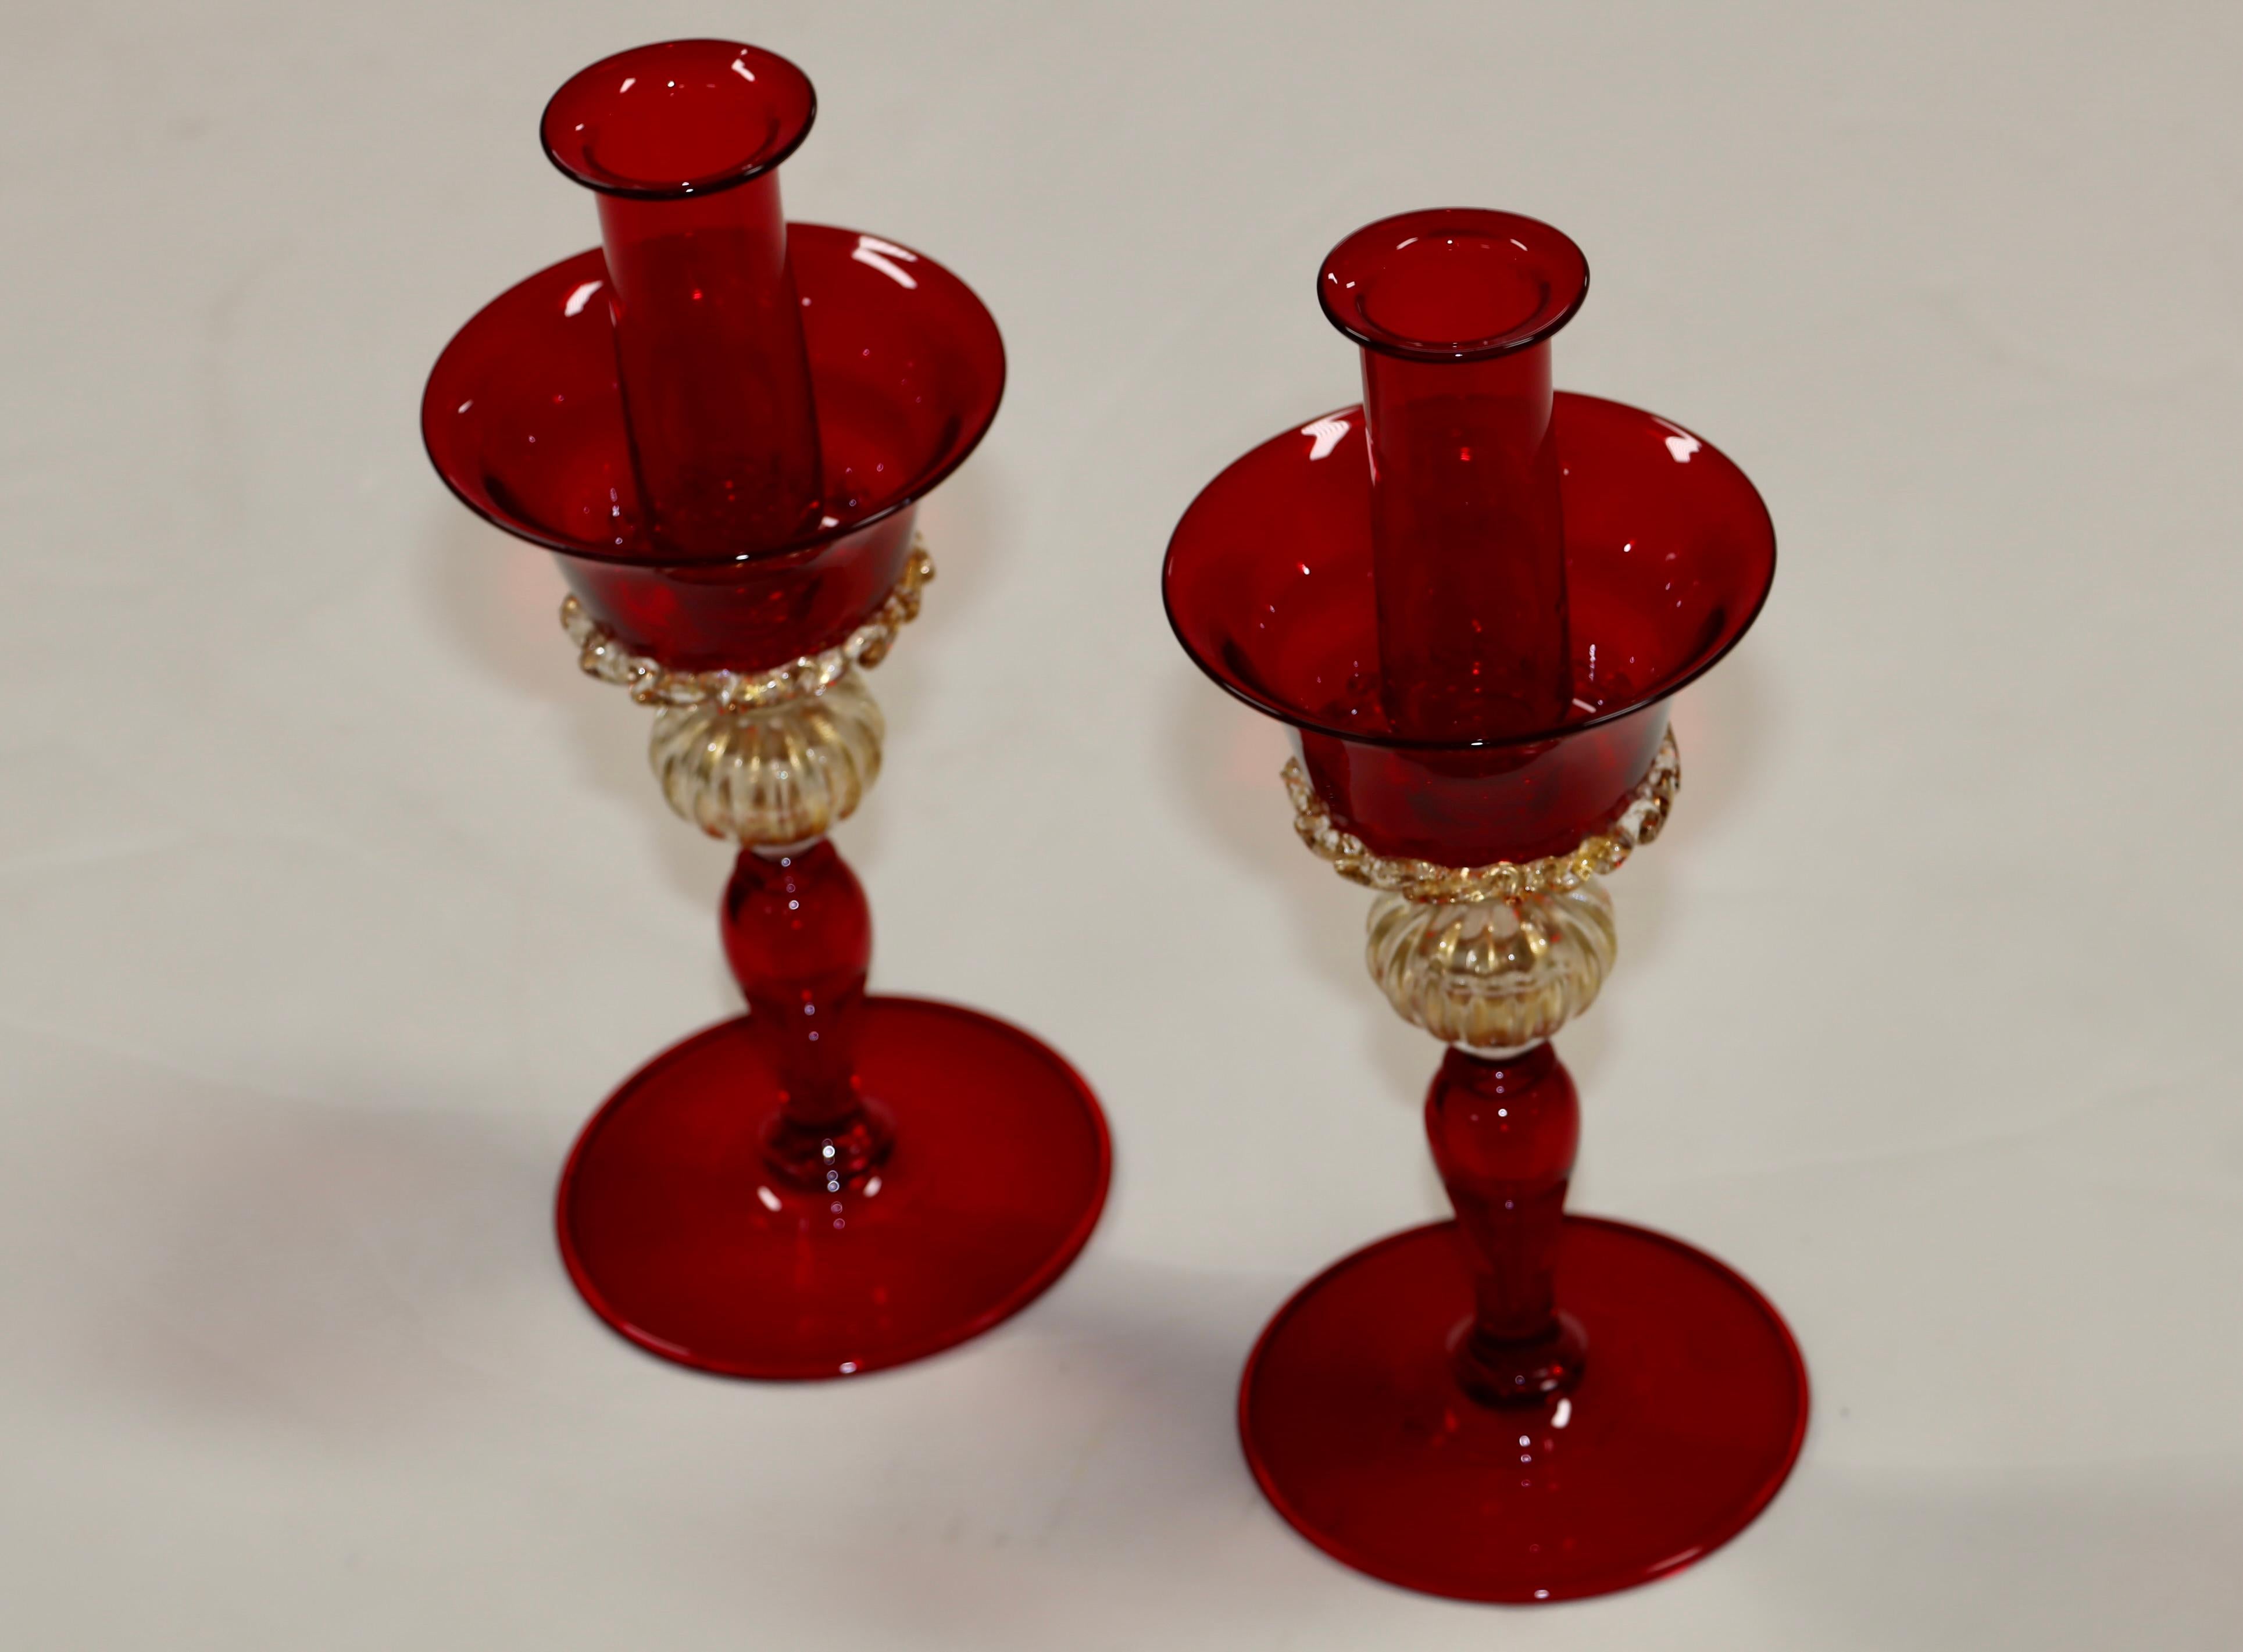 Beautiful pair of 1970's modern signed Murano glass red and gold candle holders, in vintage original condition with minor wear and patina due to age and use.